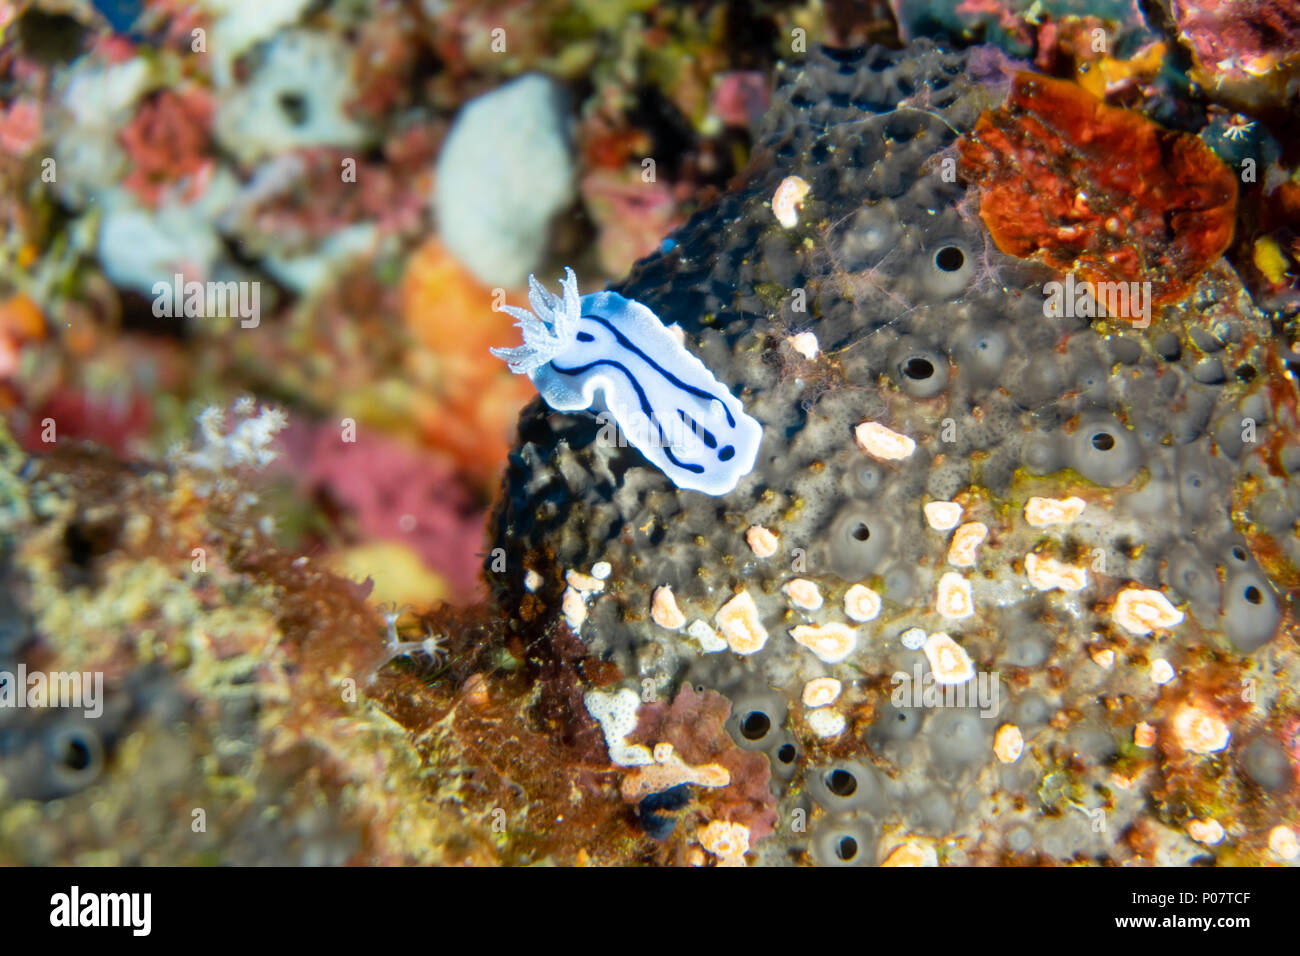 CEBU ISLAND, Philippines - May 9, 2018: underwater photo of blue nudibranch resting on corals. Diving on Cebu Island, Philippines. Stock Photo